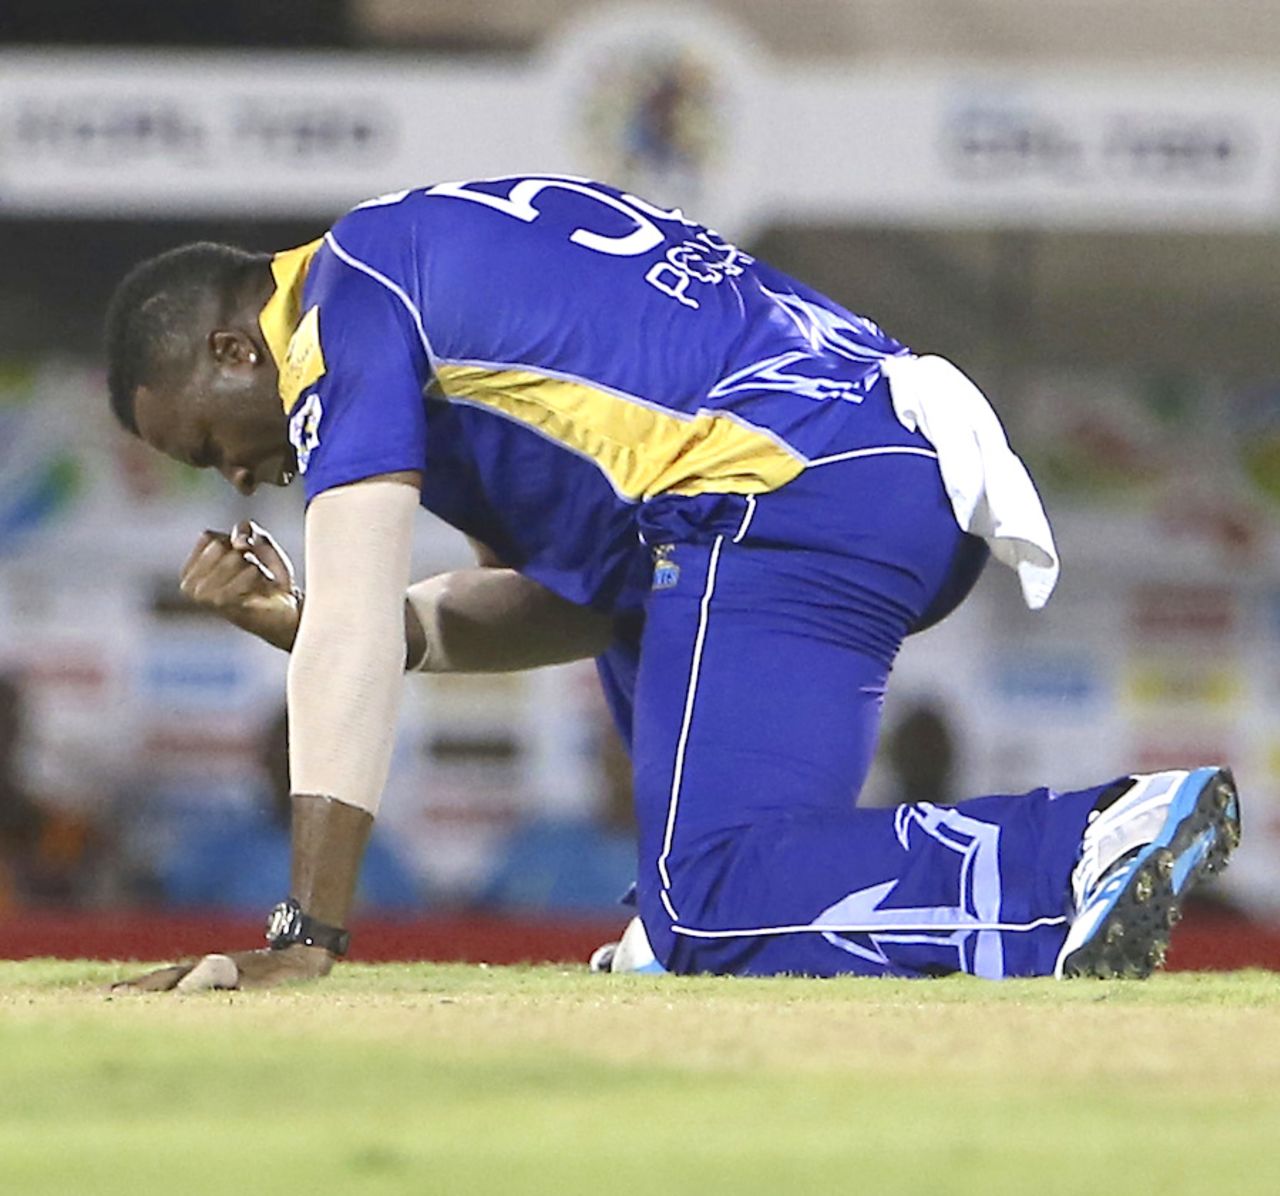 Kieron Pollard is pumped after picking up a wicket, St Lucia Zouks v Barbados Tridents, CPL 2014, Gros Islet, July 31, 2014